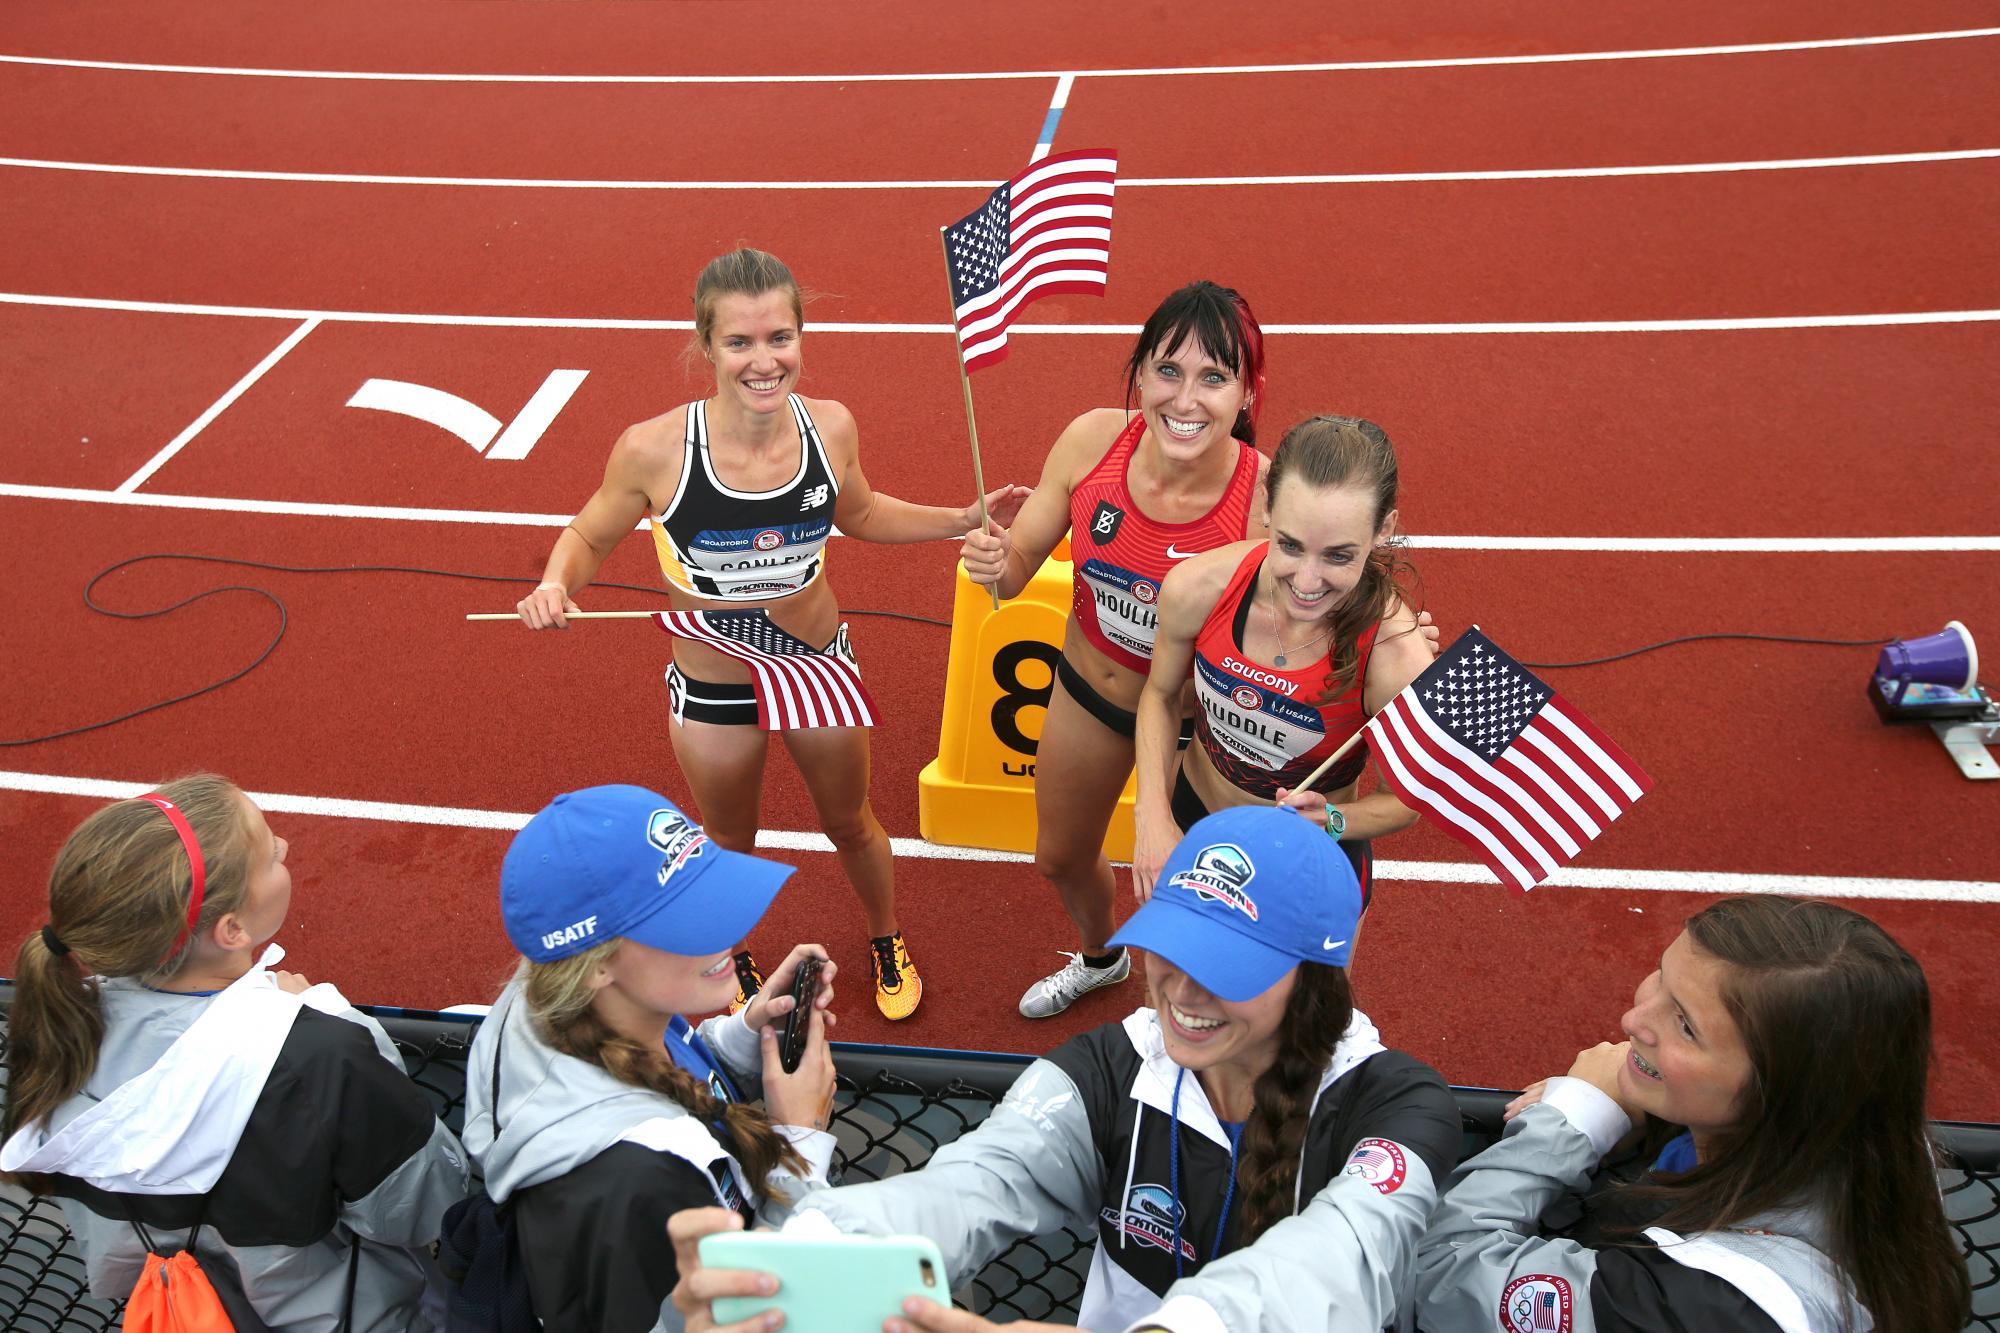  Kim Conley holds U,S. flag after trials.